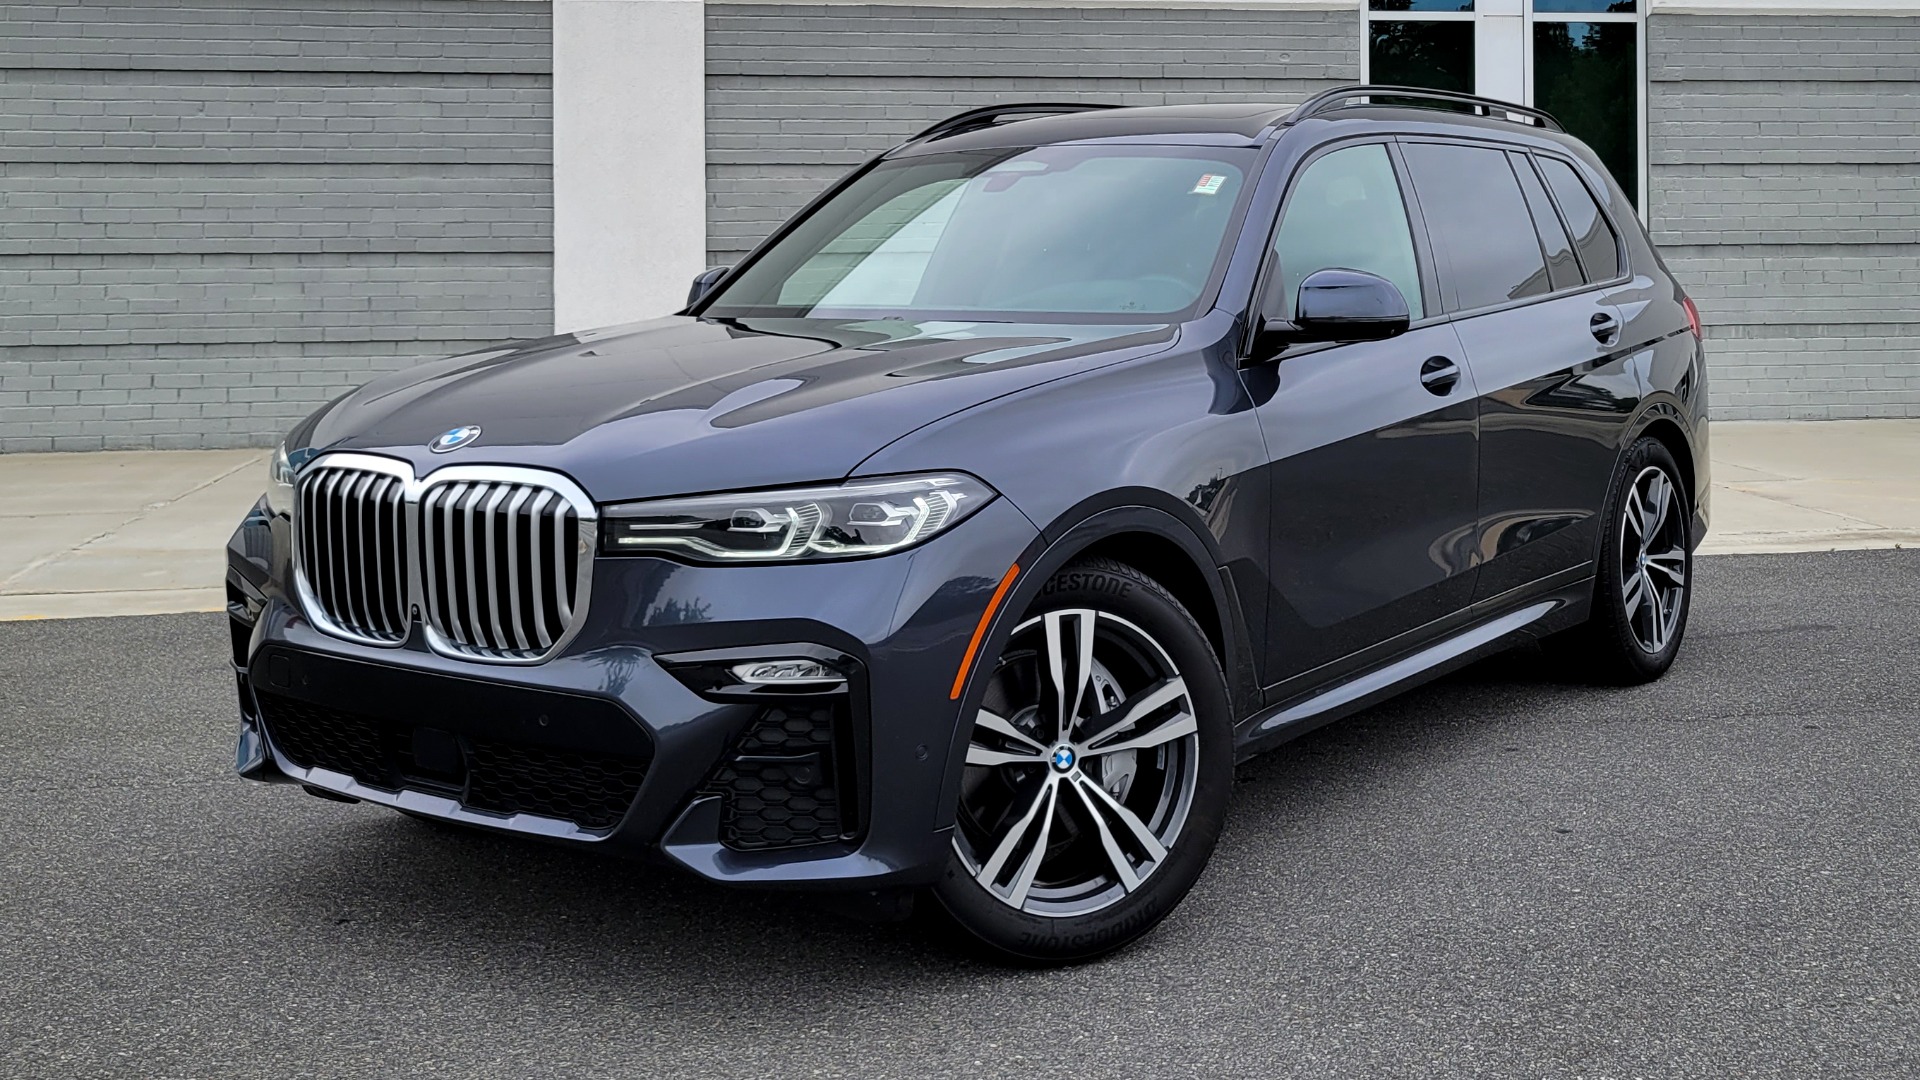 Used 2019 BMW X7 XDRIVE40I M-SPORT / PREMIUM / CLD THR / PARK ASST / DRVR ASST / SKY LOUNGE  for sale $64,395 at Formula Imports in Charlotte NC 28227 6